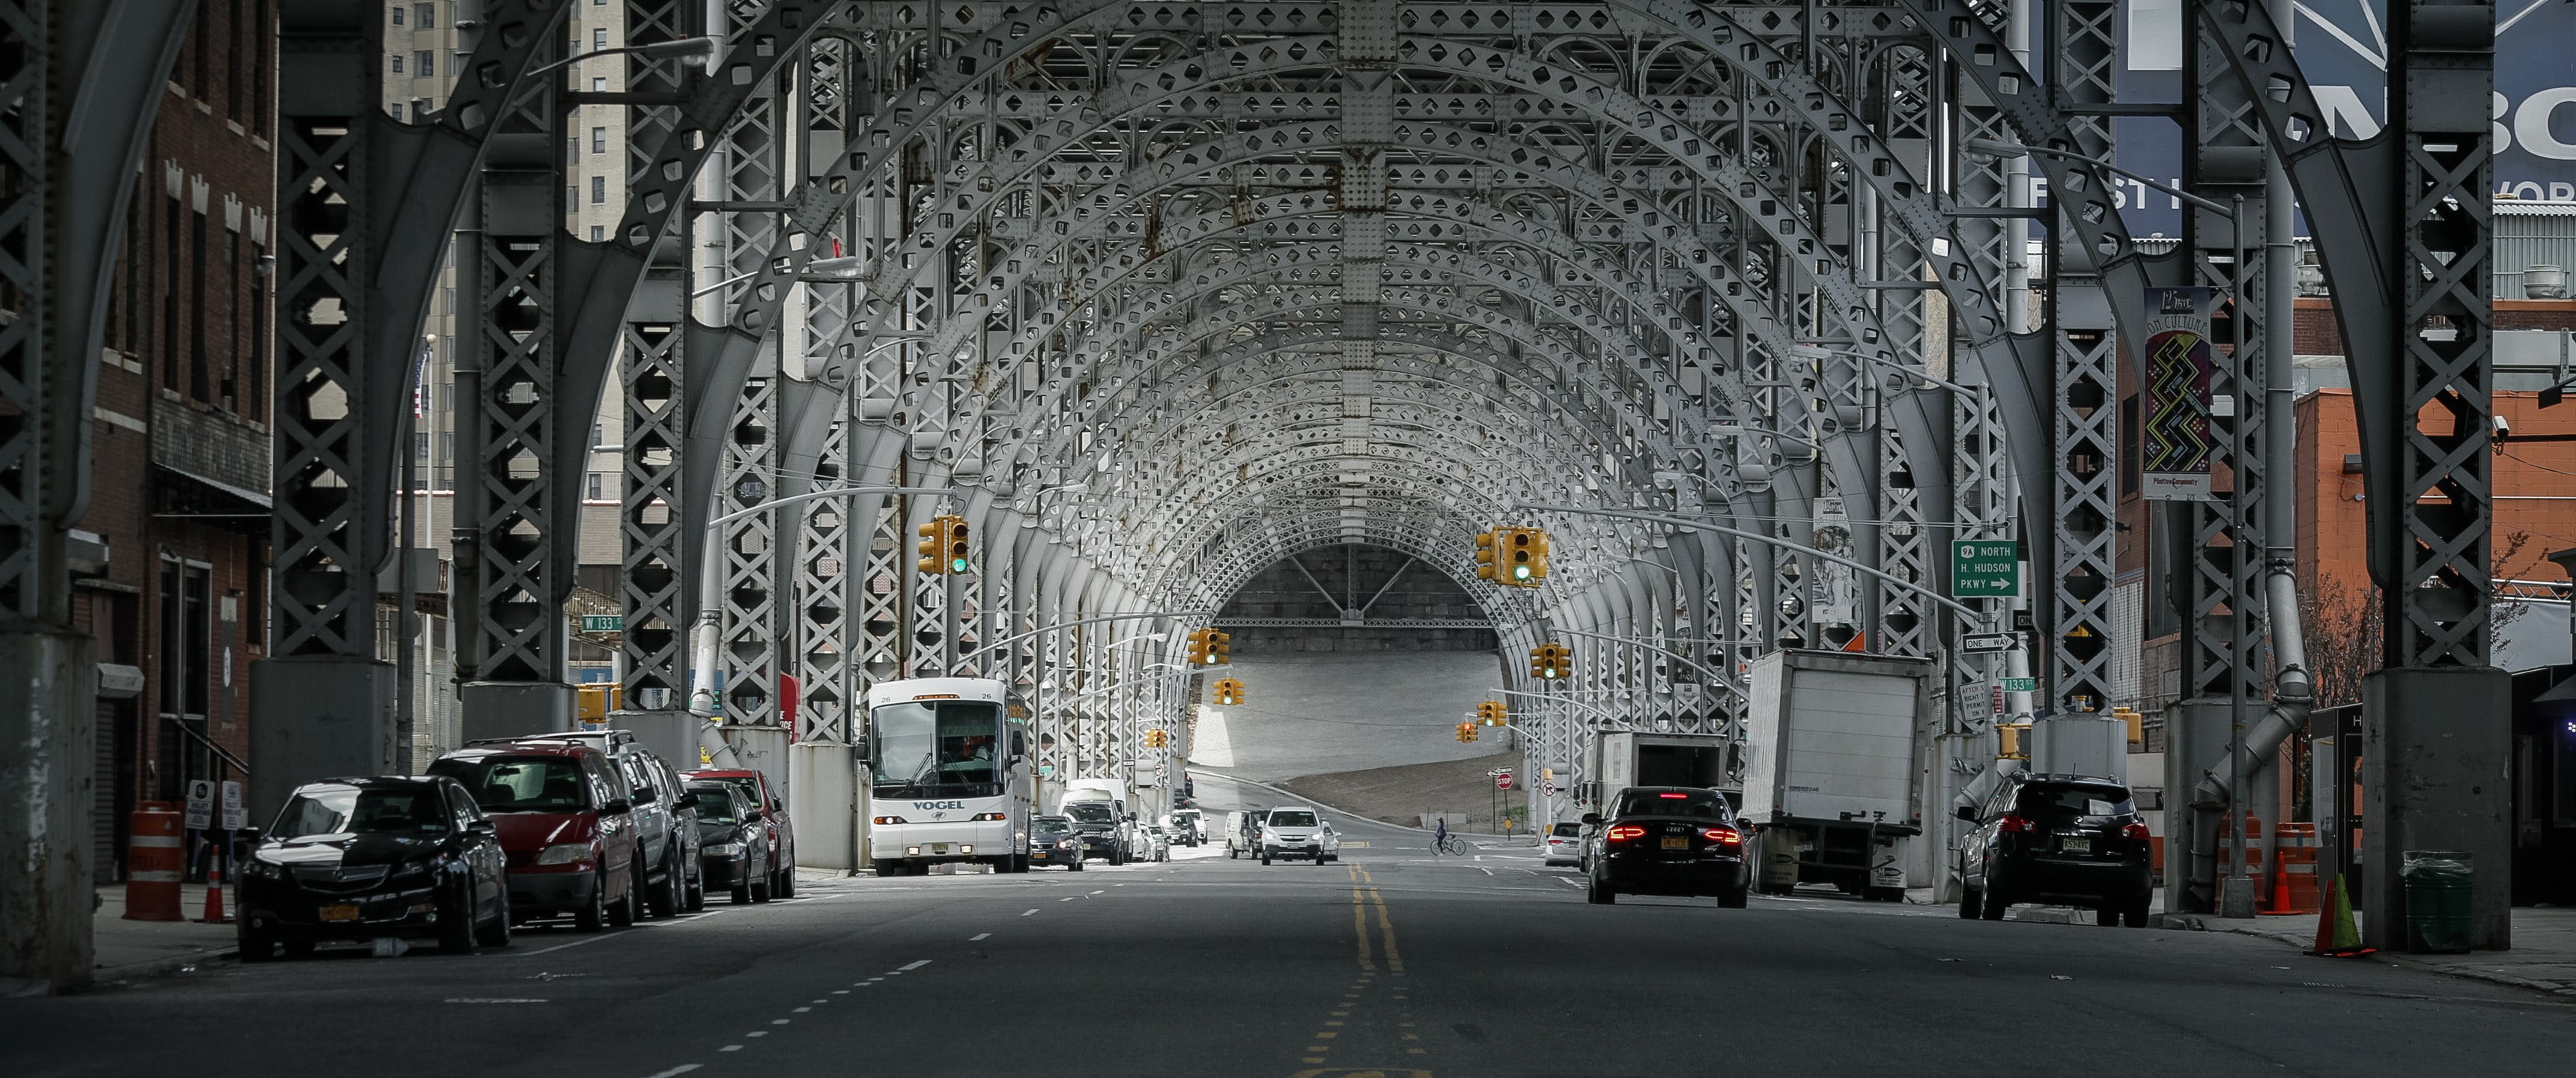 white and red floral area rug, bridge, city, road, traffic, New York City